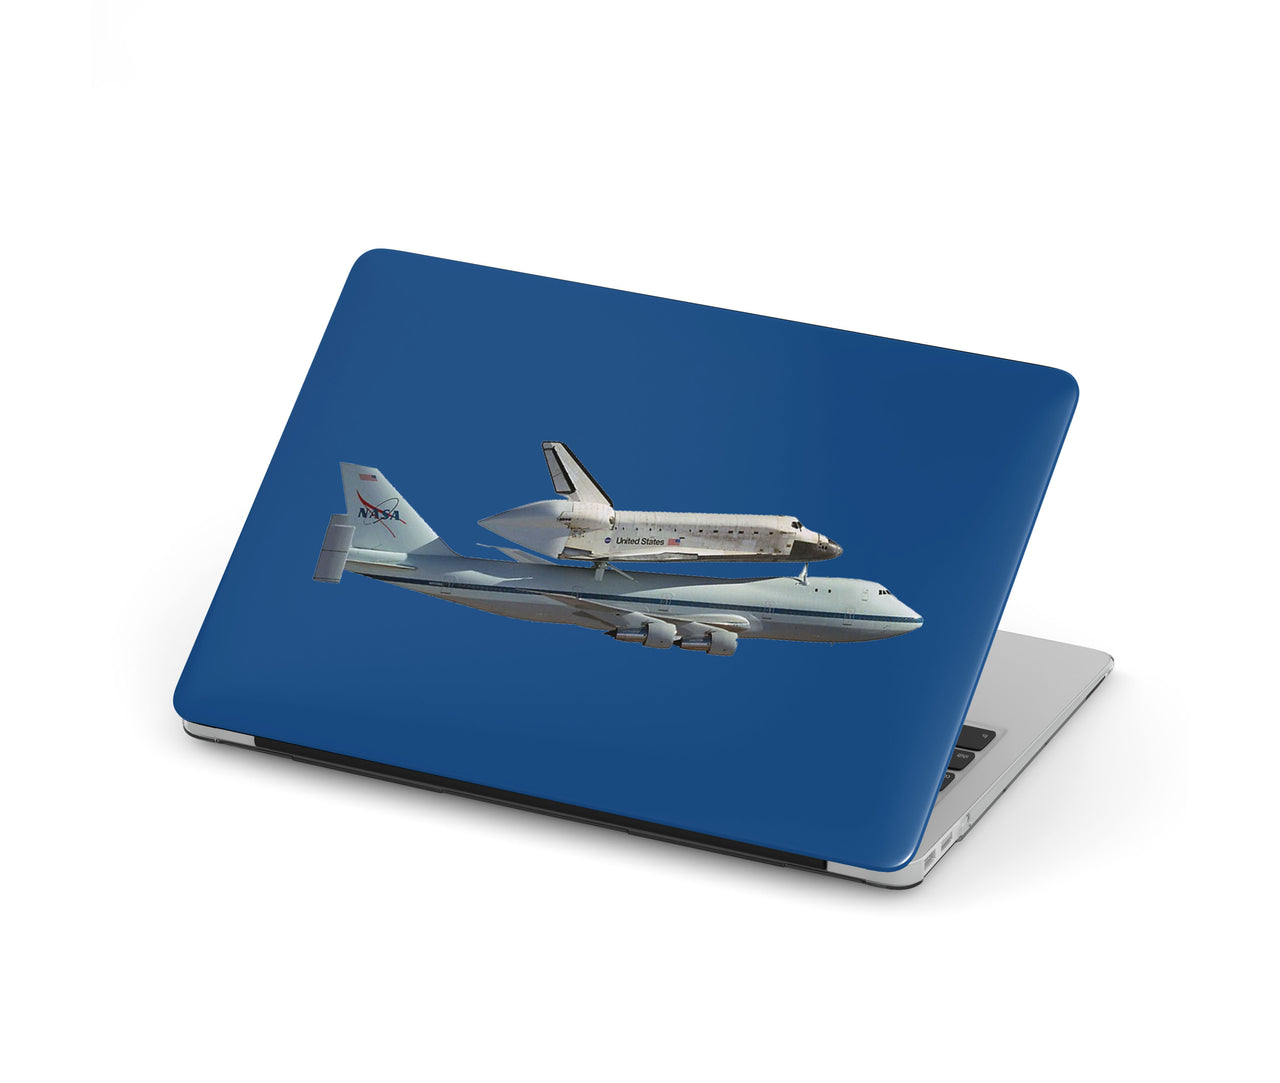 Space shuttle on 747 Designed Macbook Cases